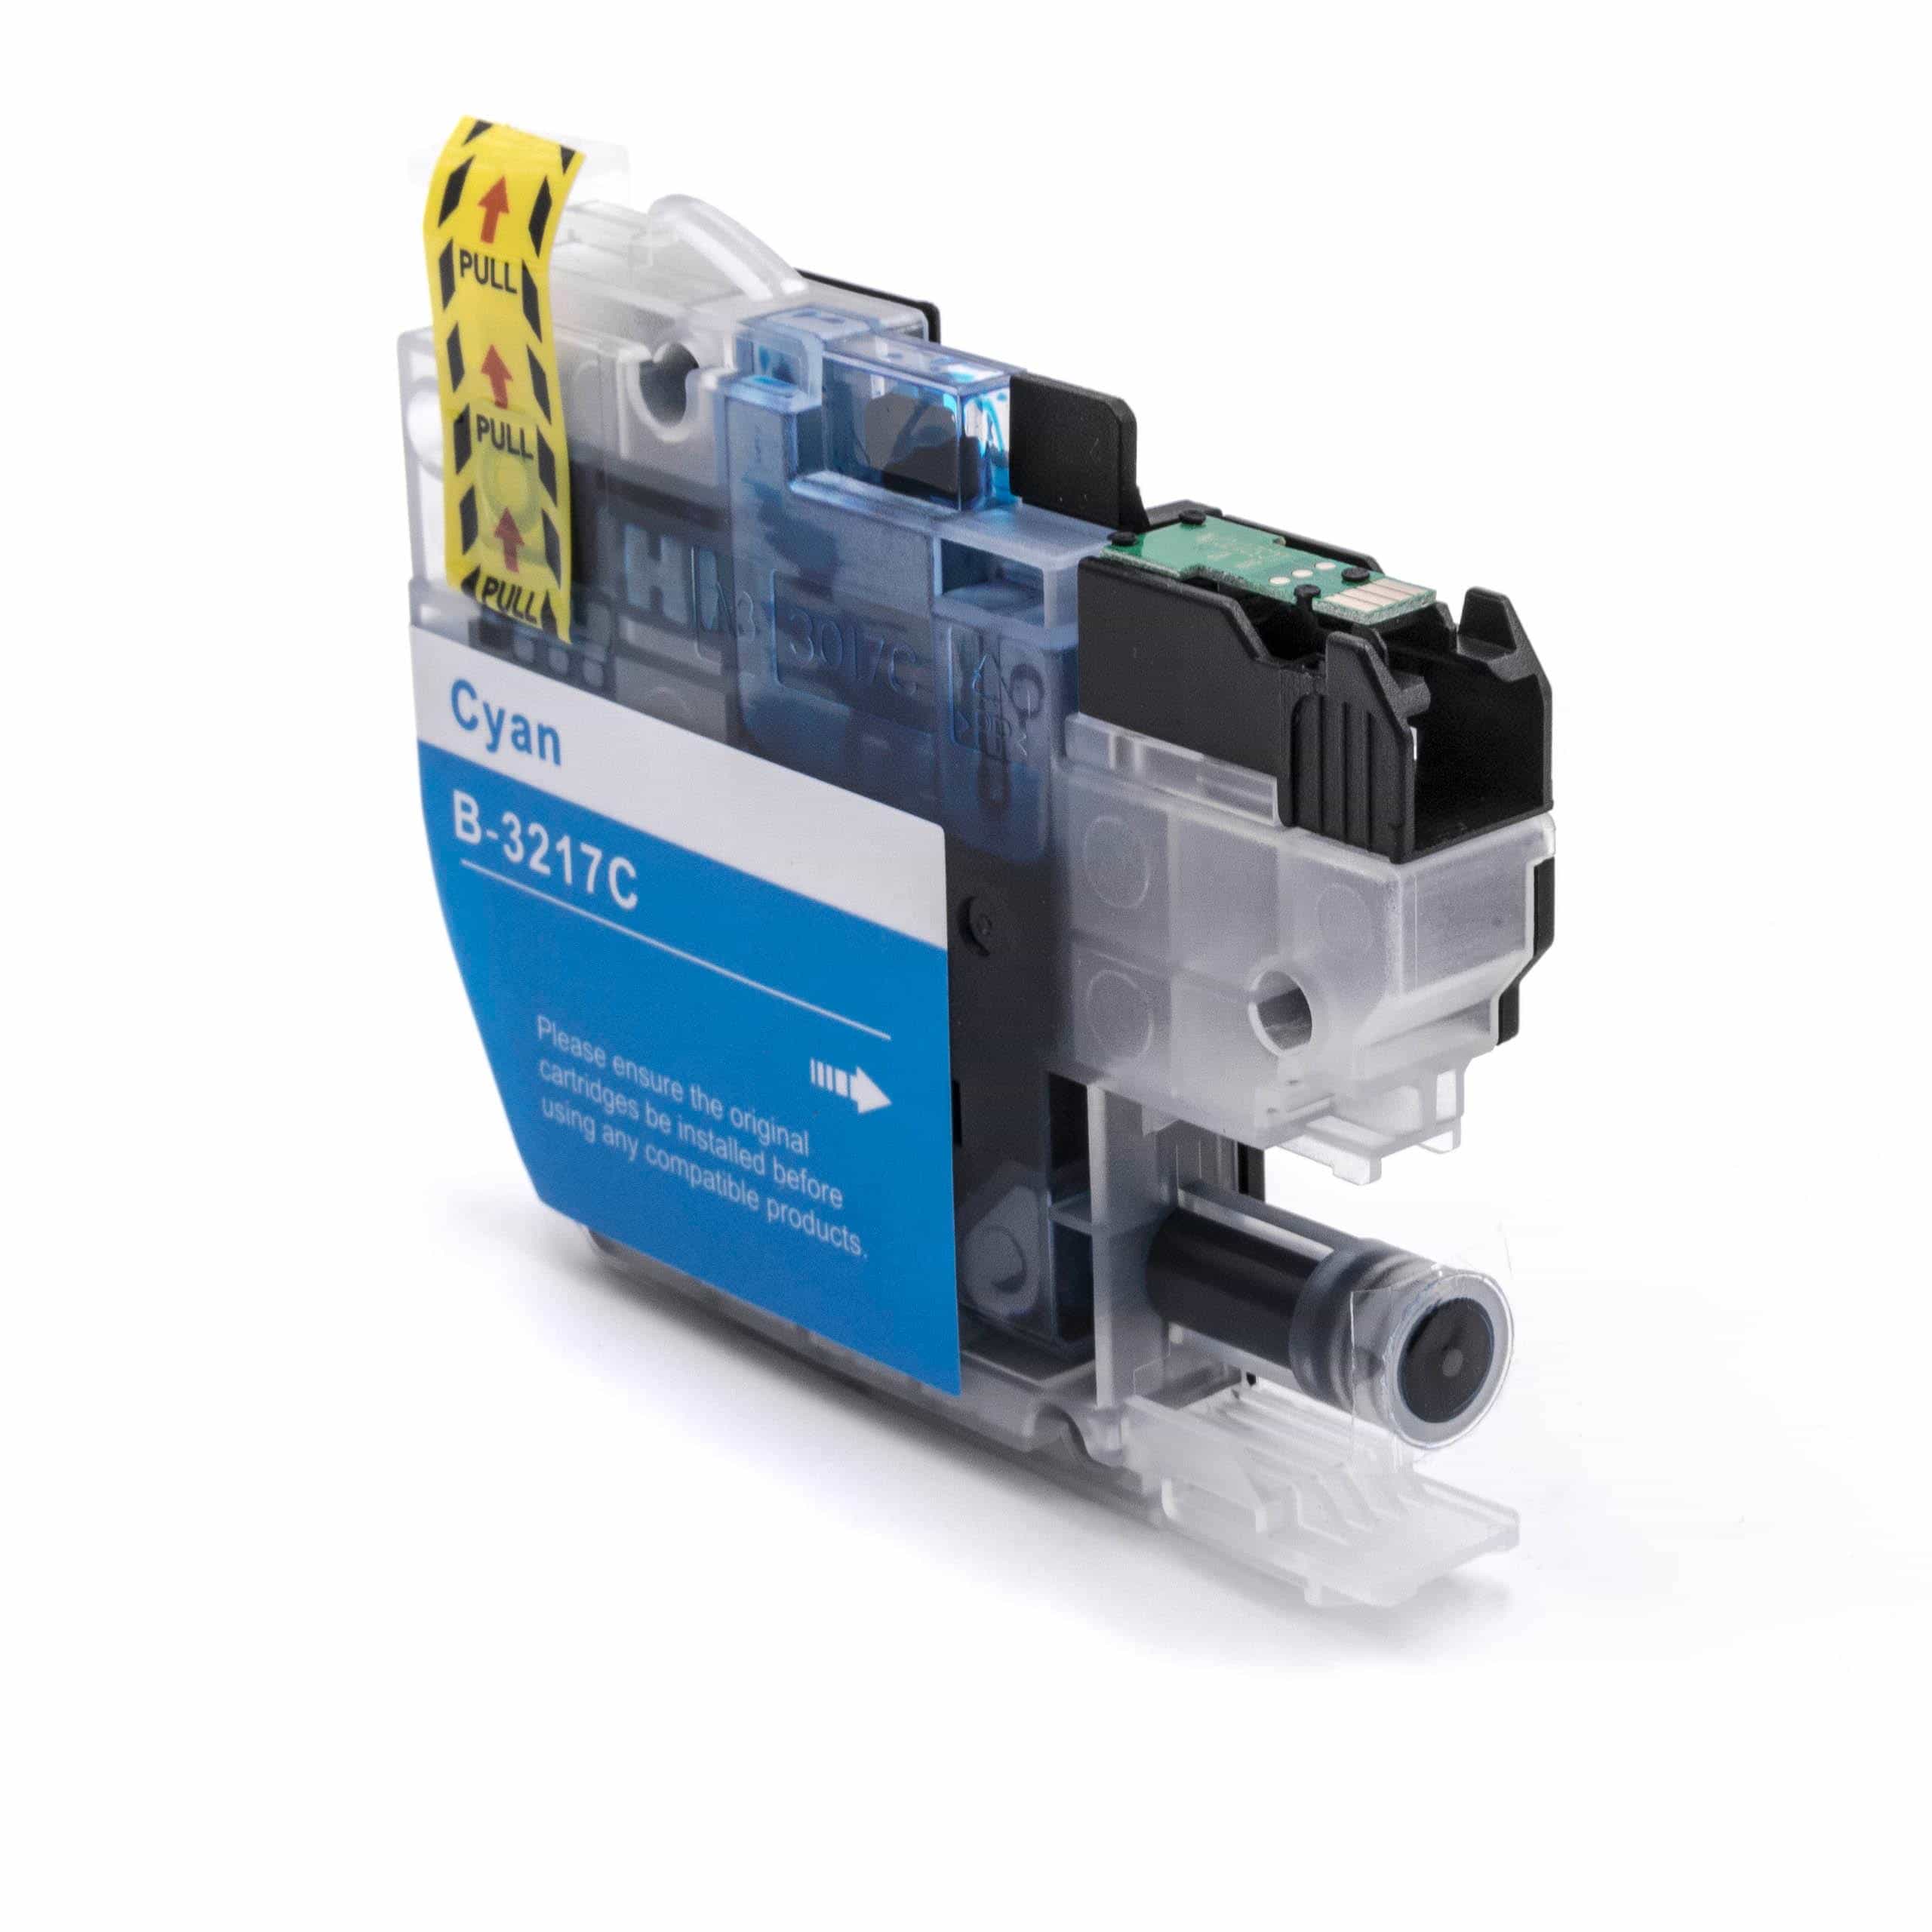 Ink Cartridge as Exchange for Brother LC-3217C, LC3217C for Brother Printer - Cyan 12 ml + Chip